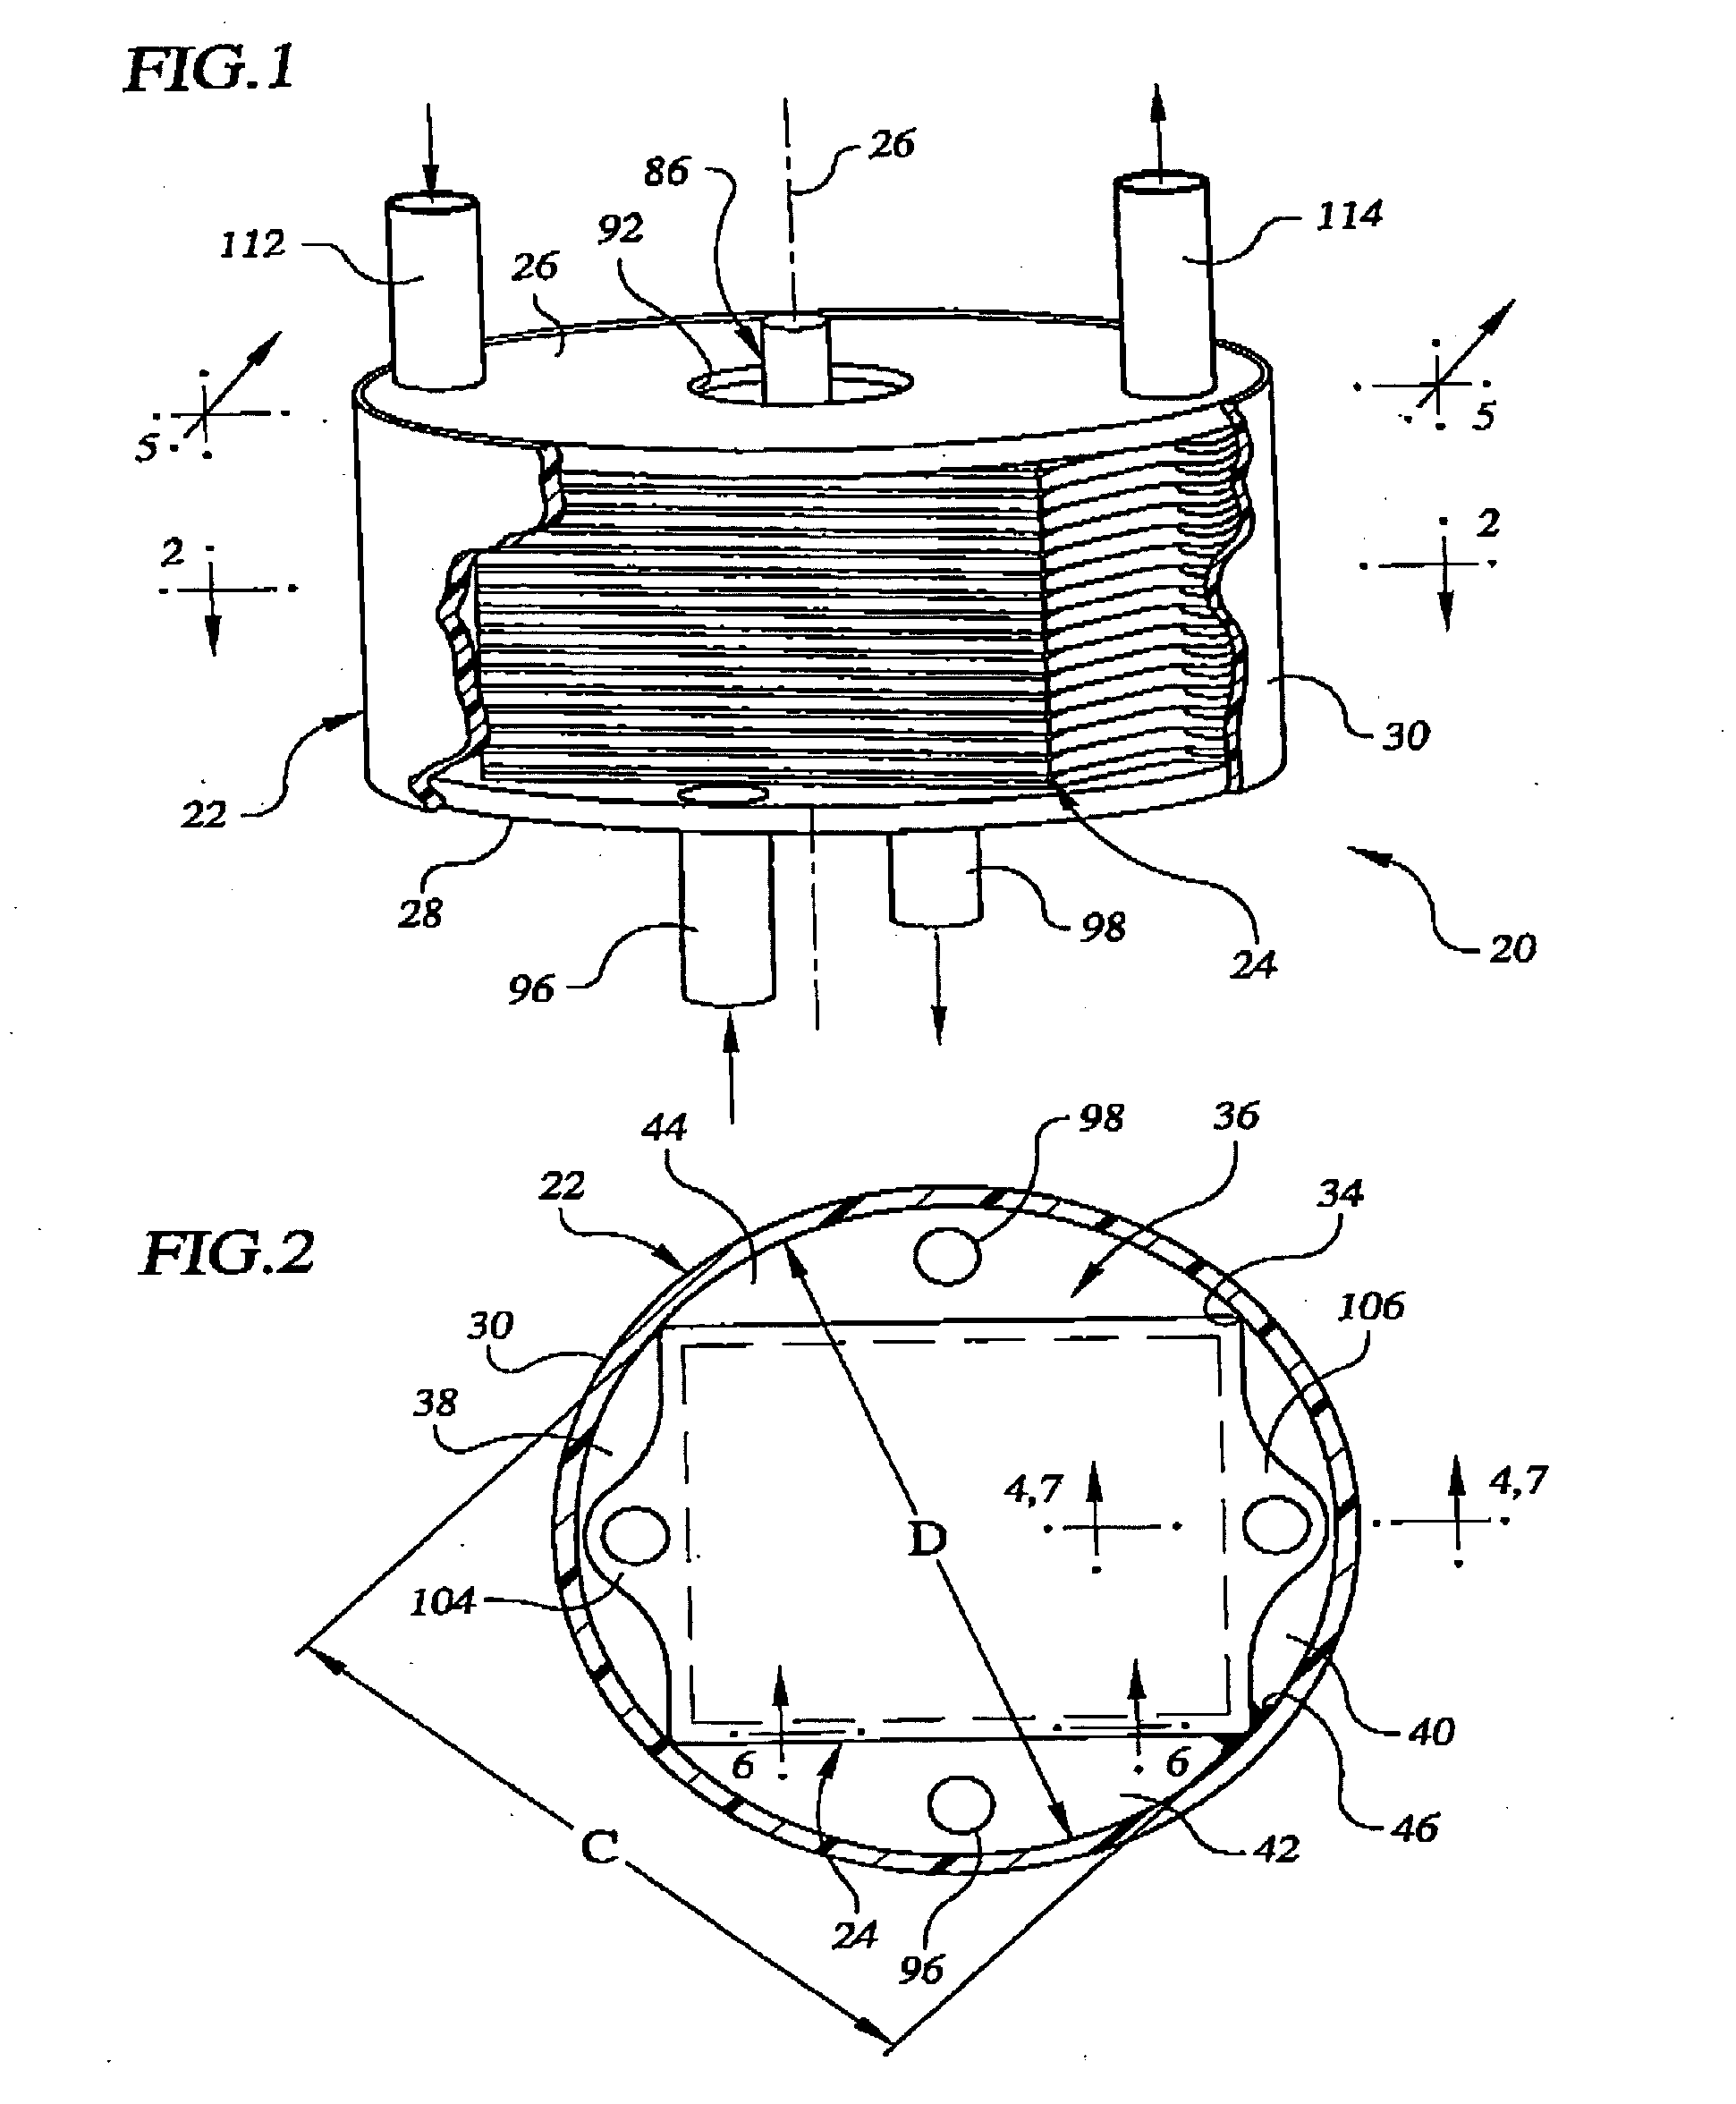 Lightweight direct methanol fuel cell and supporting systems